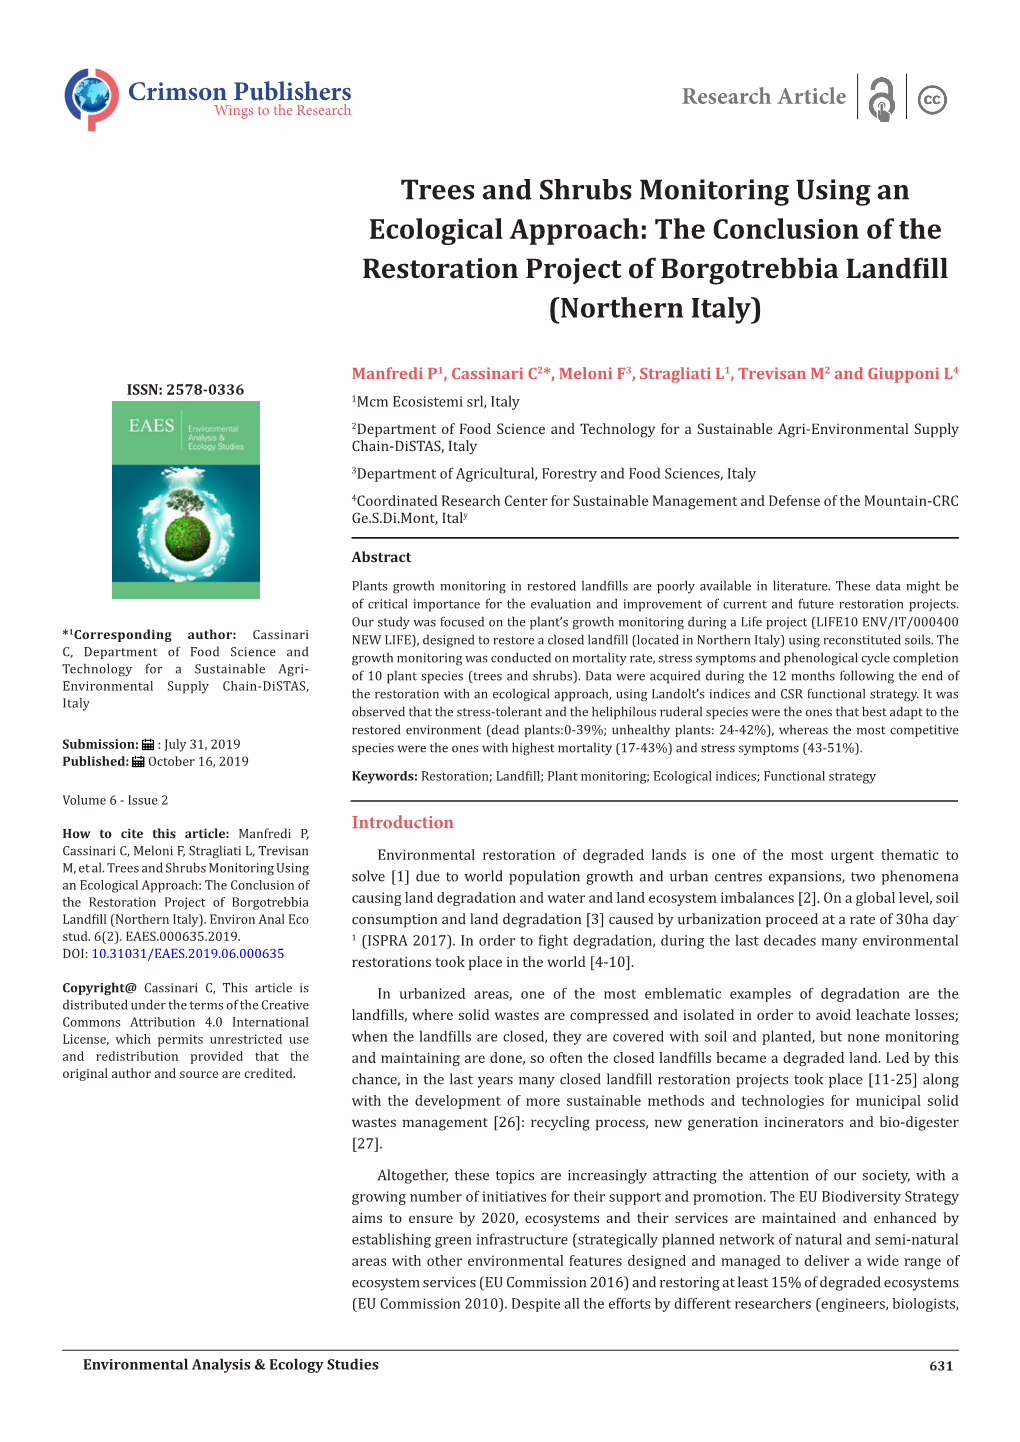 Trees and Shrubs Monitoring Using an Ecological Approach: the Conclusion of the Restoration Project of Borgotrebbia Landfill (Northern Italy)